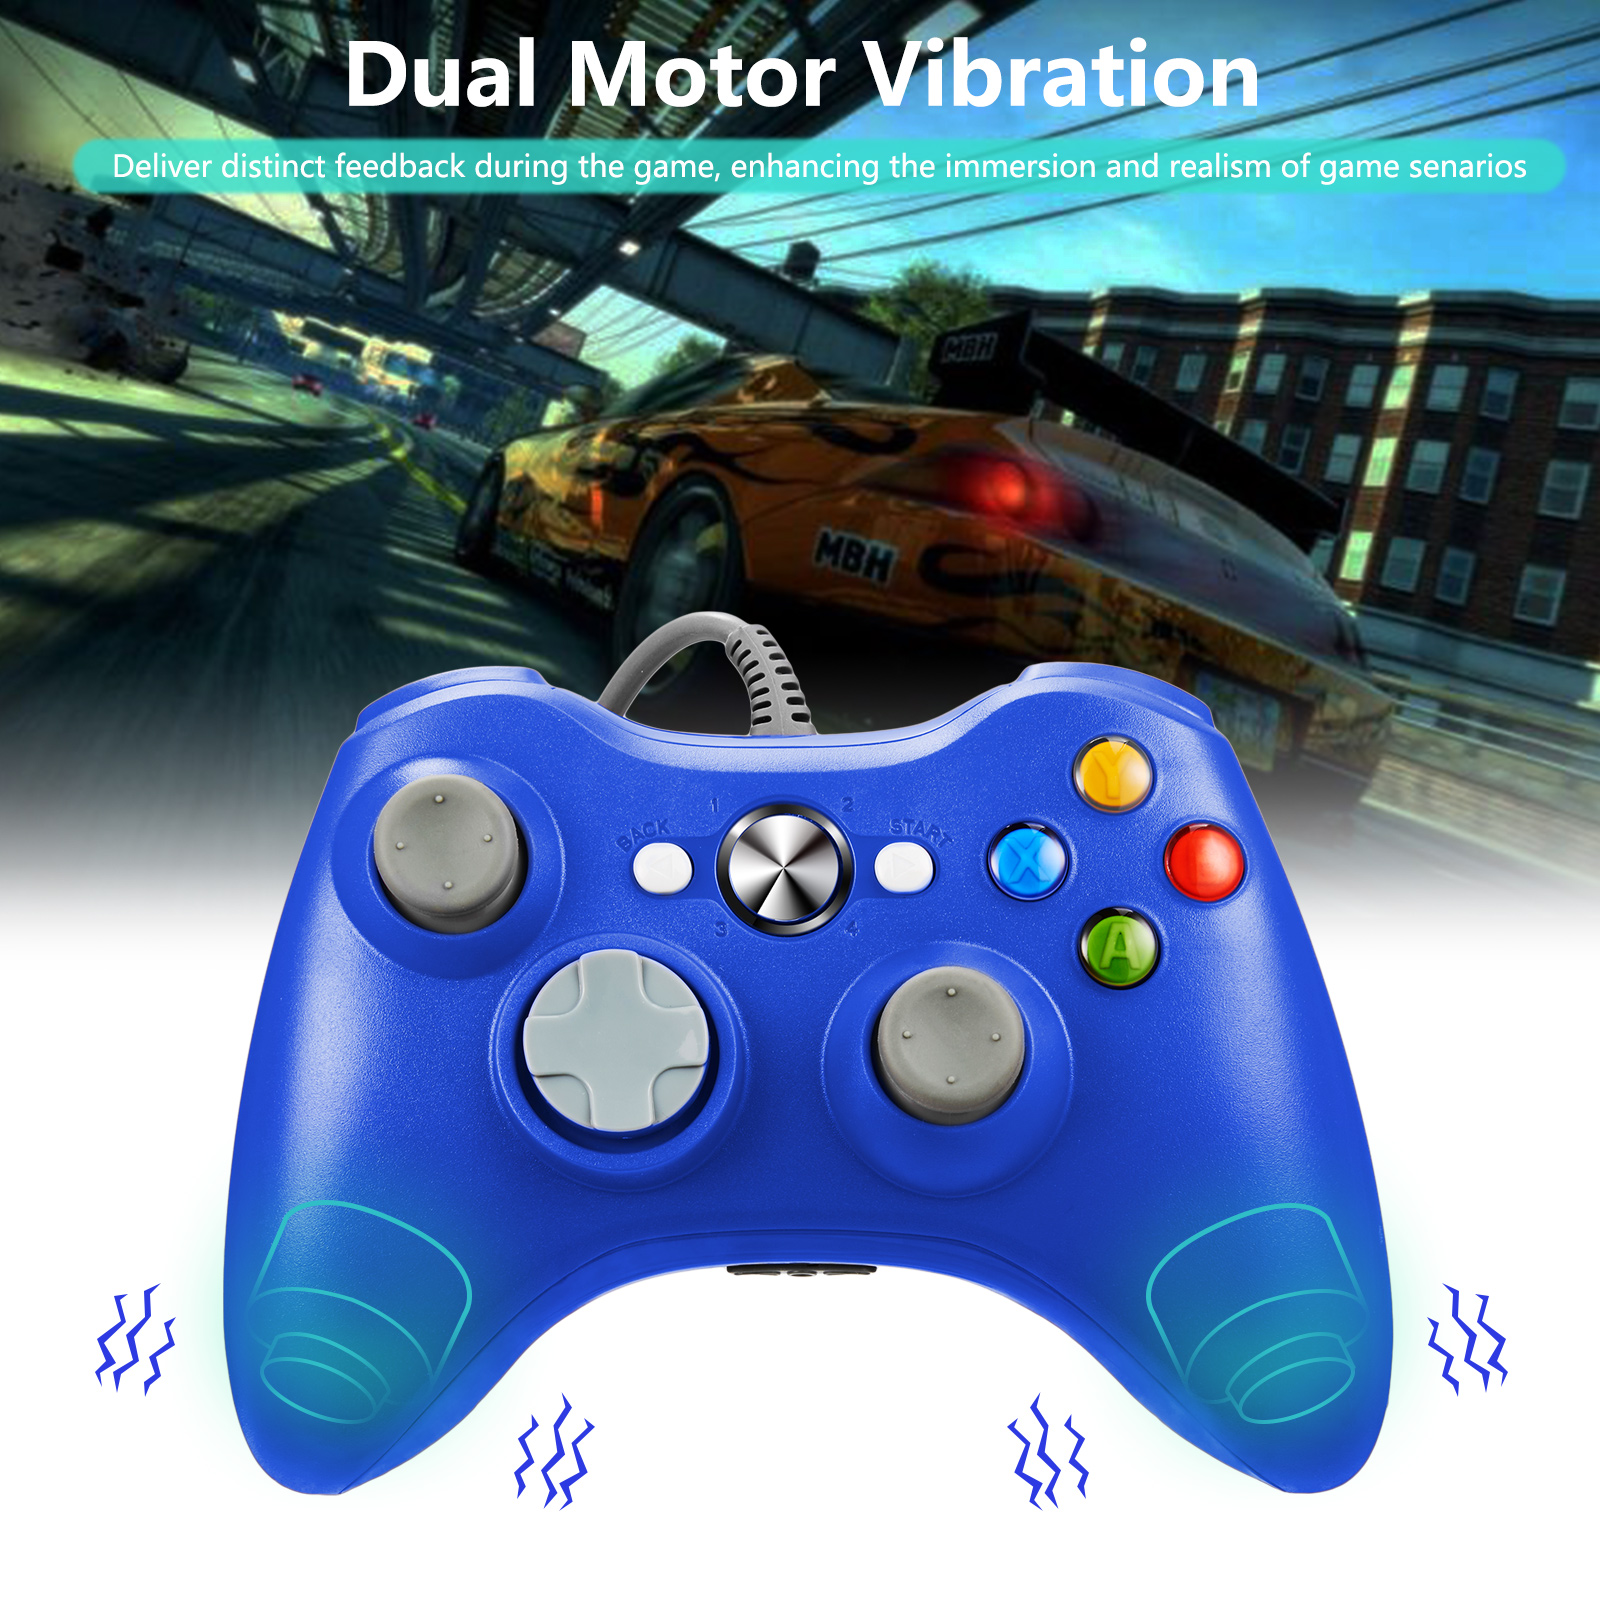 LUXMO Xbox 360 Wired Controlle with Shoulders Buttons for Xbox 360/Xbox 360 Slim/PC Windows 7 8 10 Game (Blue) - image 4 of 7